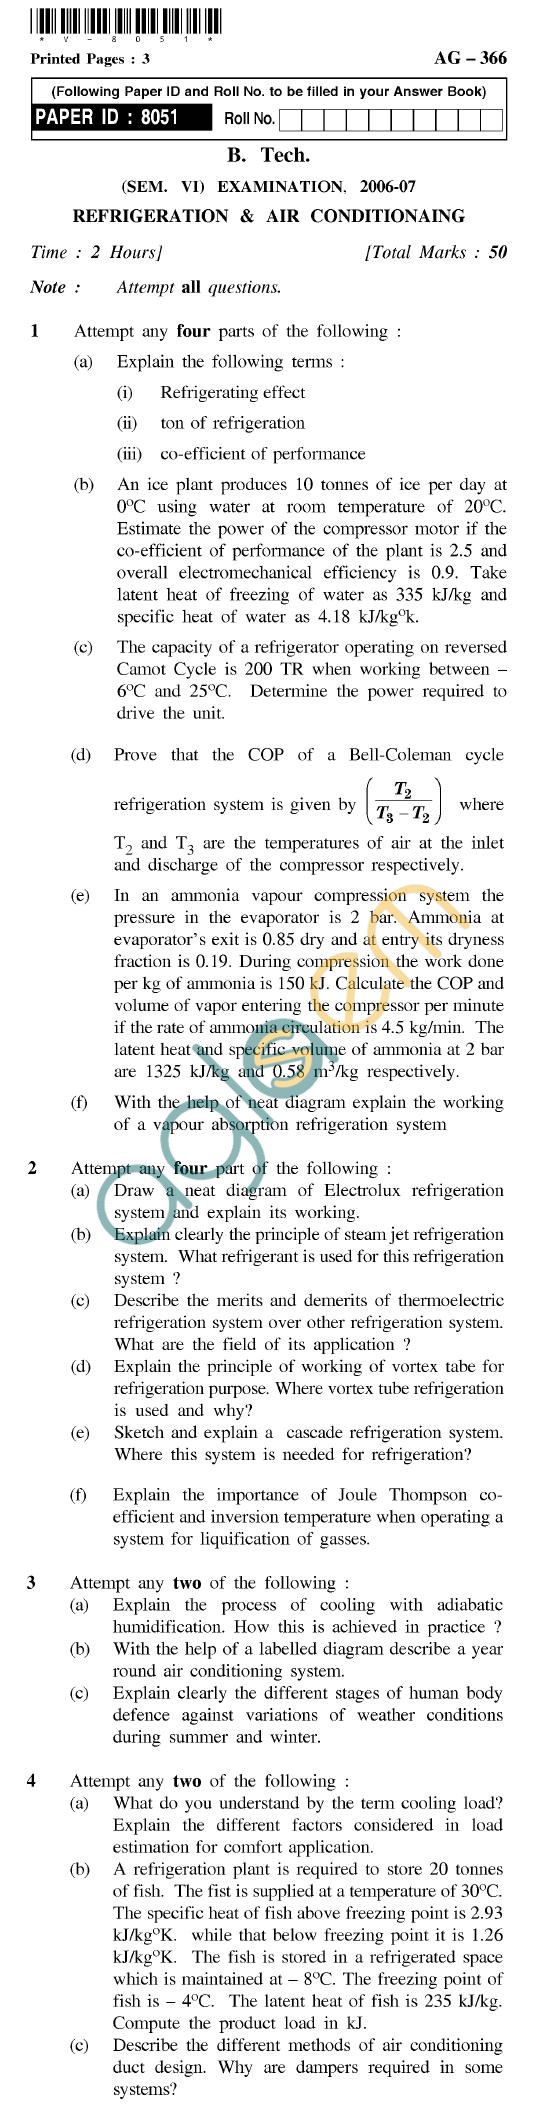 UPTU B.Tech Question Papers - AG-366 - Refrigeration & Air Conditioning